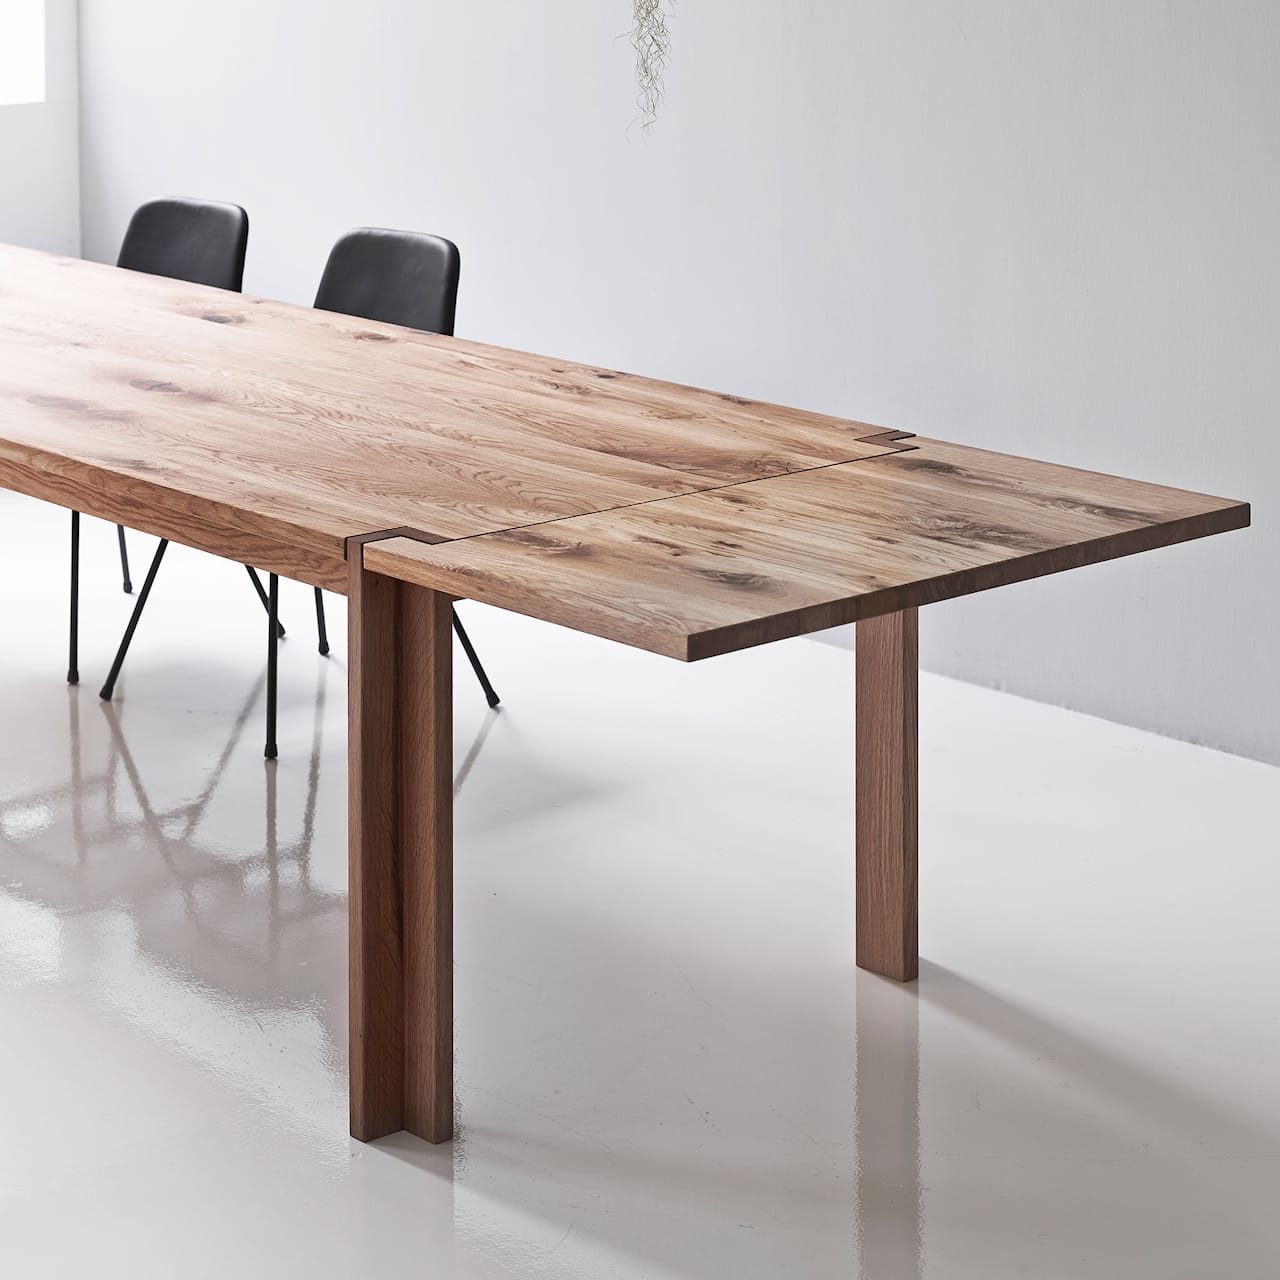 Jeppe Utzon Table #1 Extension Leaf Only